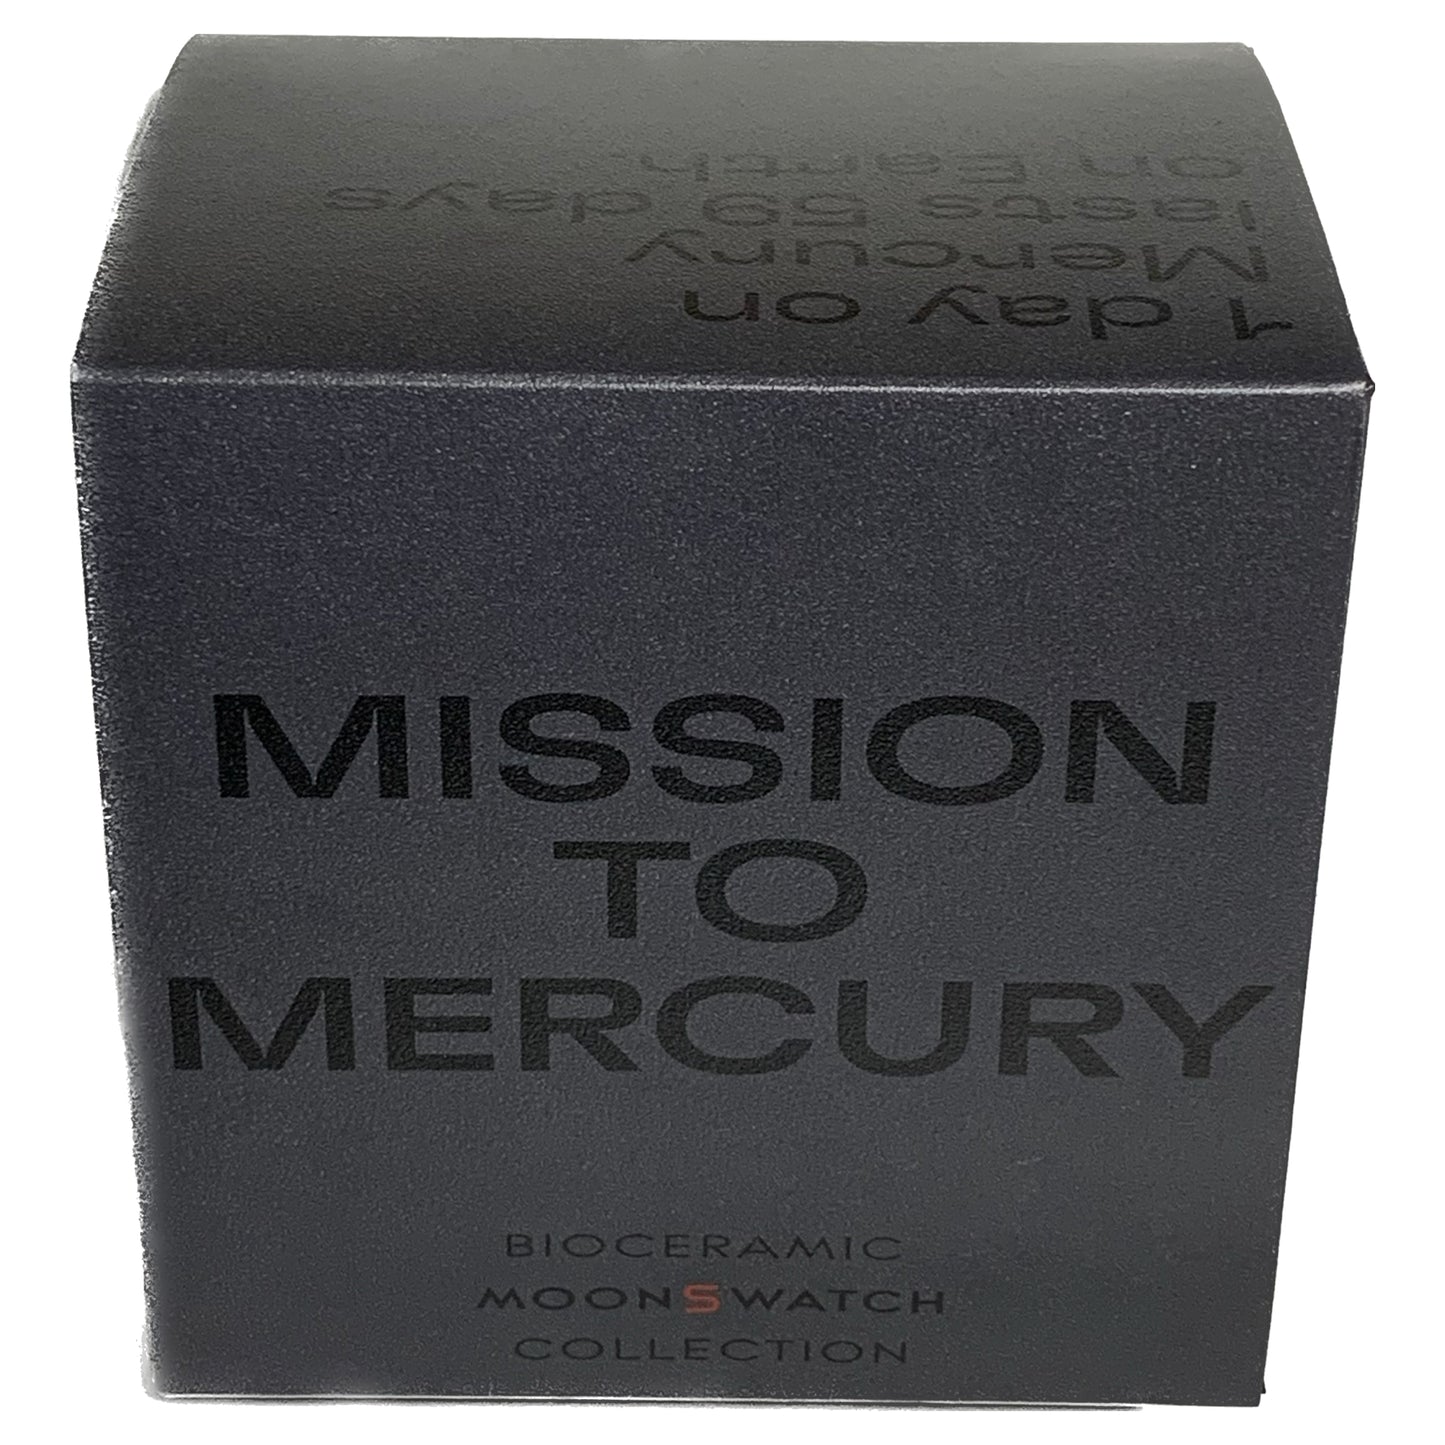 Swatch X Omega Moonswatch Mission to Mercury